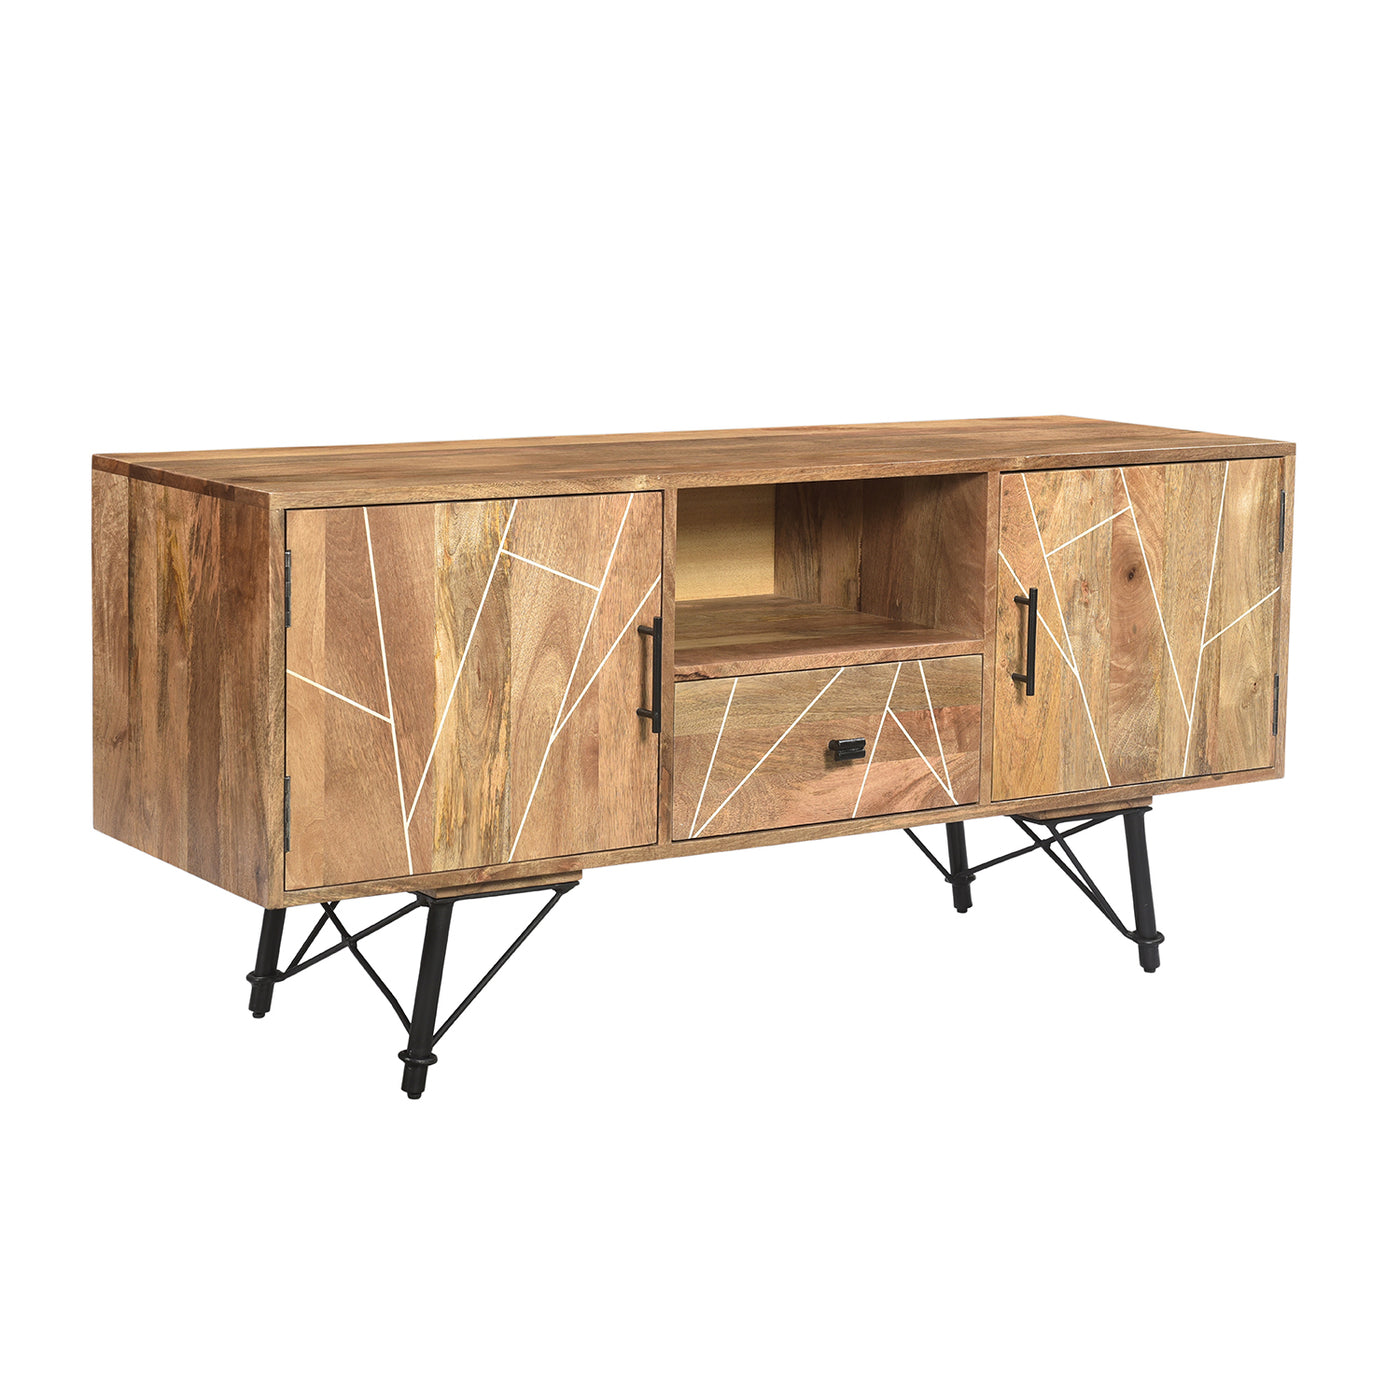 Mosaic Home Media Unit in Natural Finish